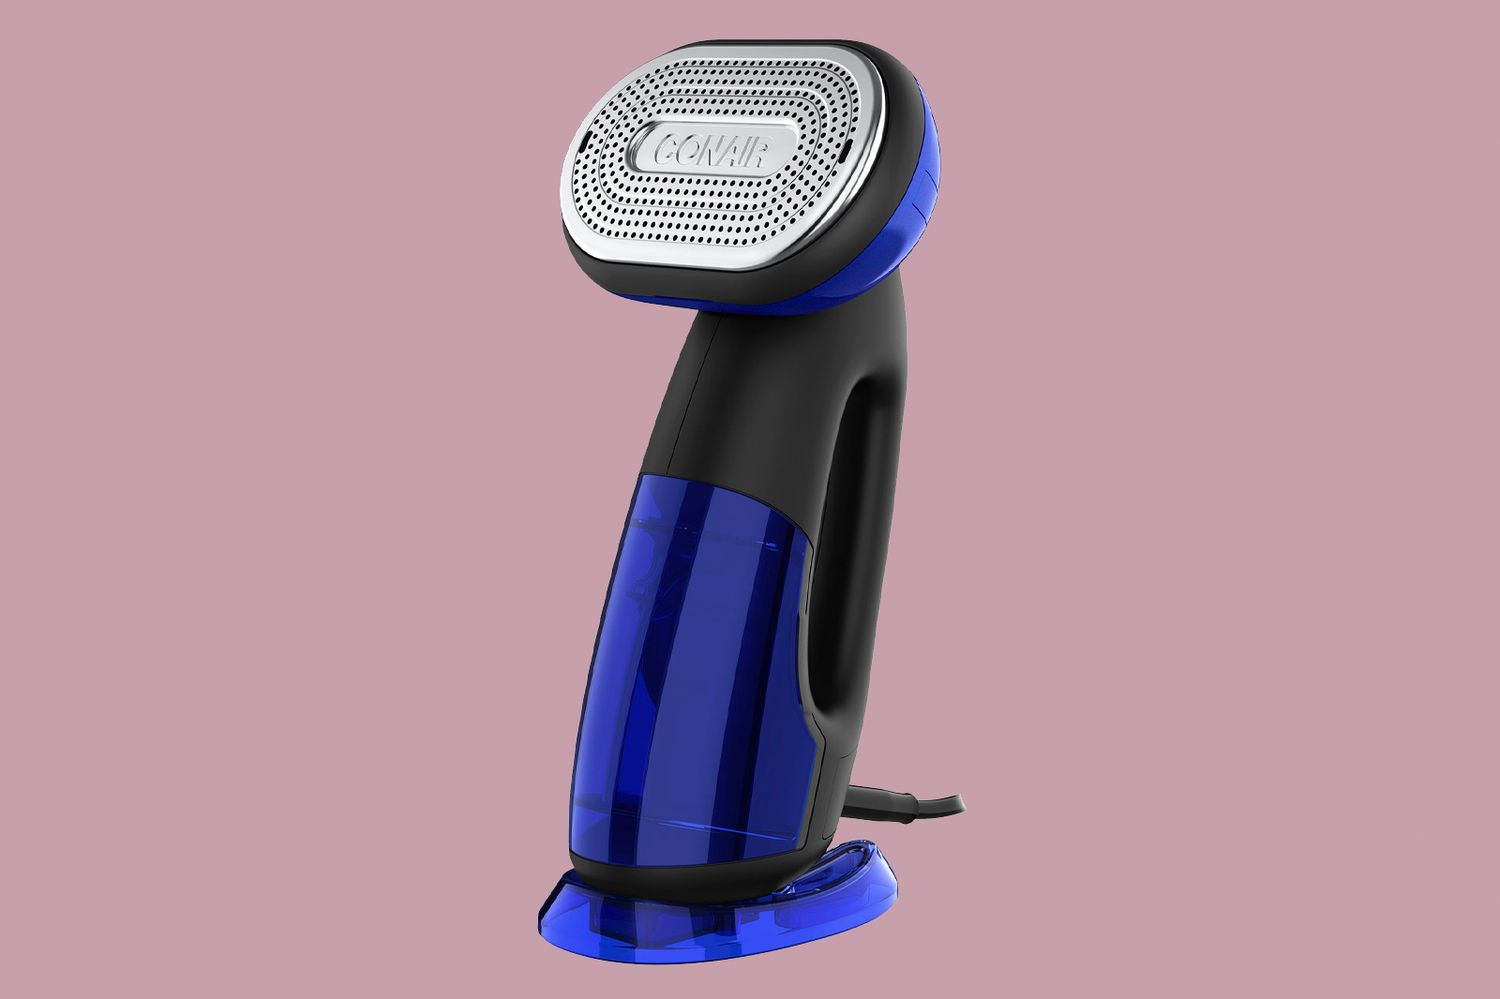 How To Prime Conair Turbo Steamer